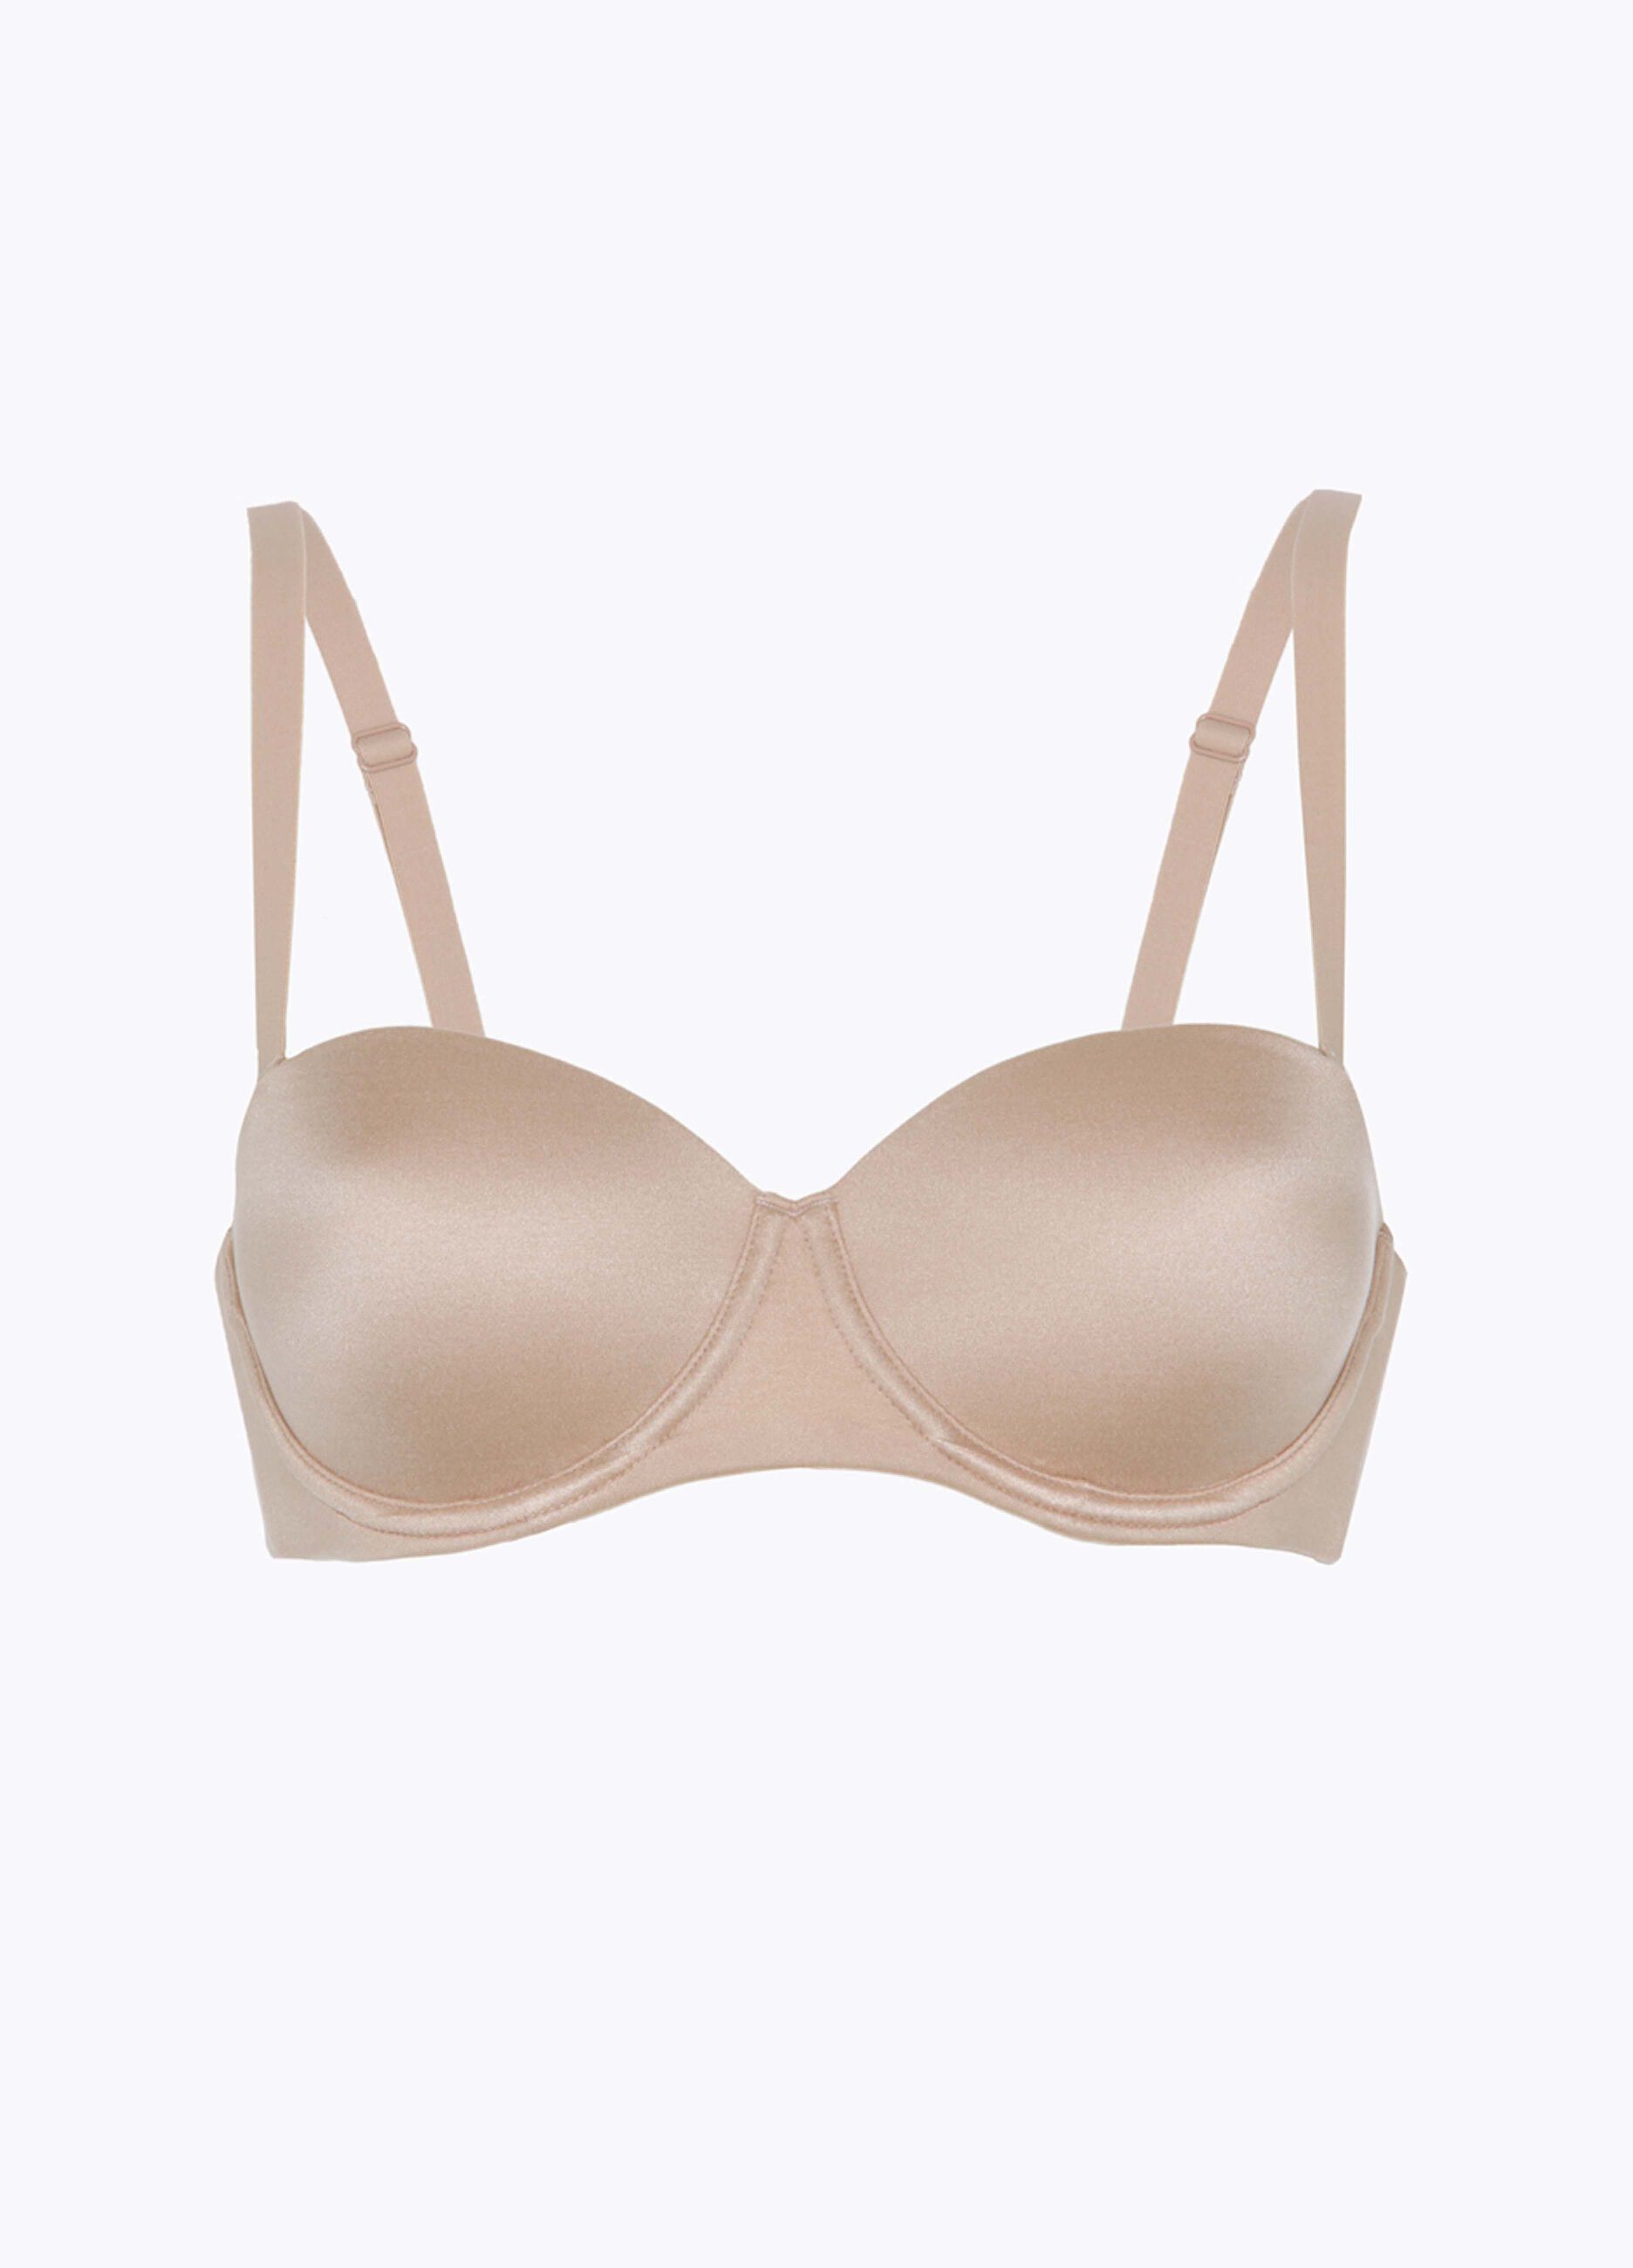 Body Blis bra with underwire and removable shoulder straps